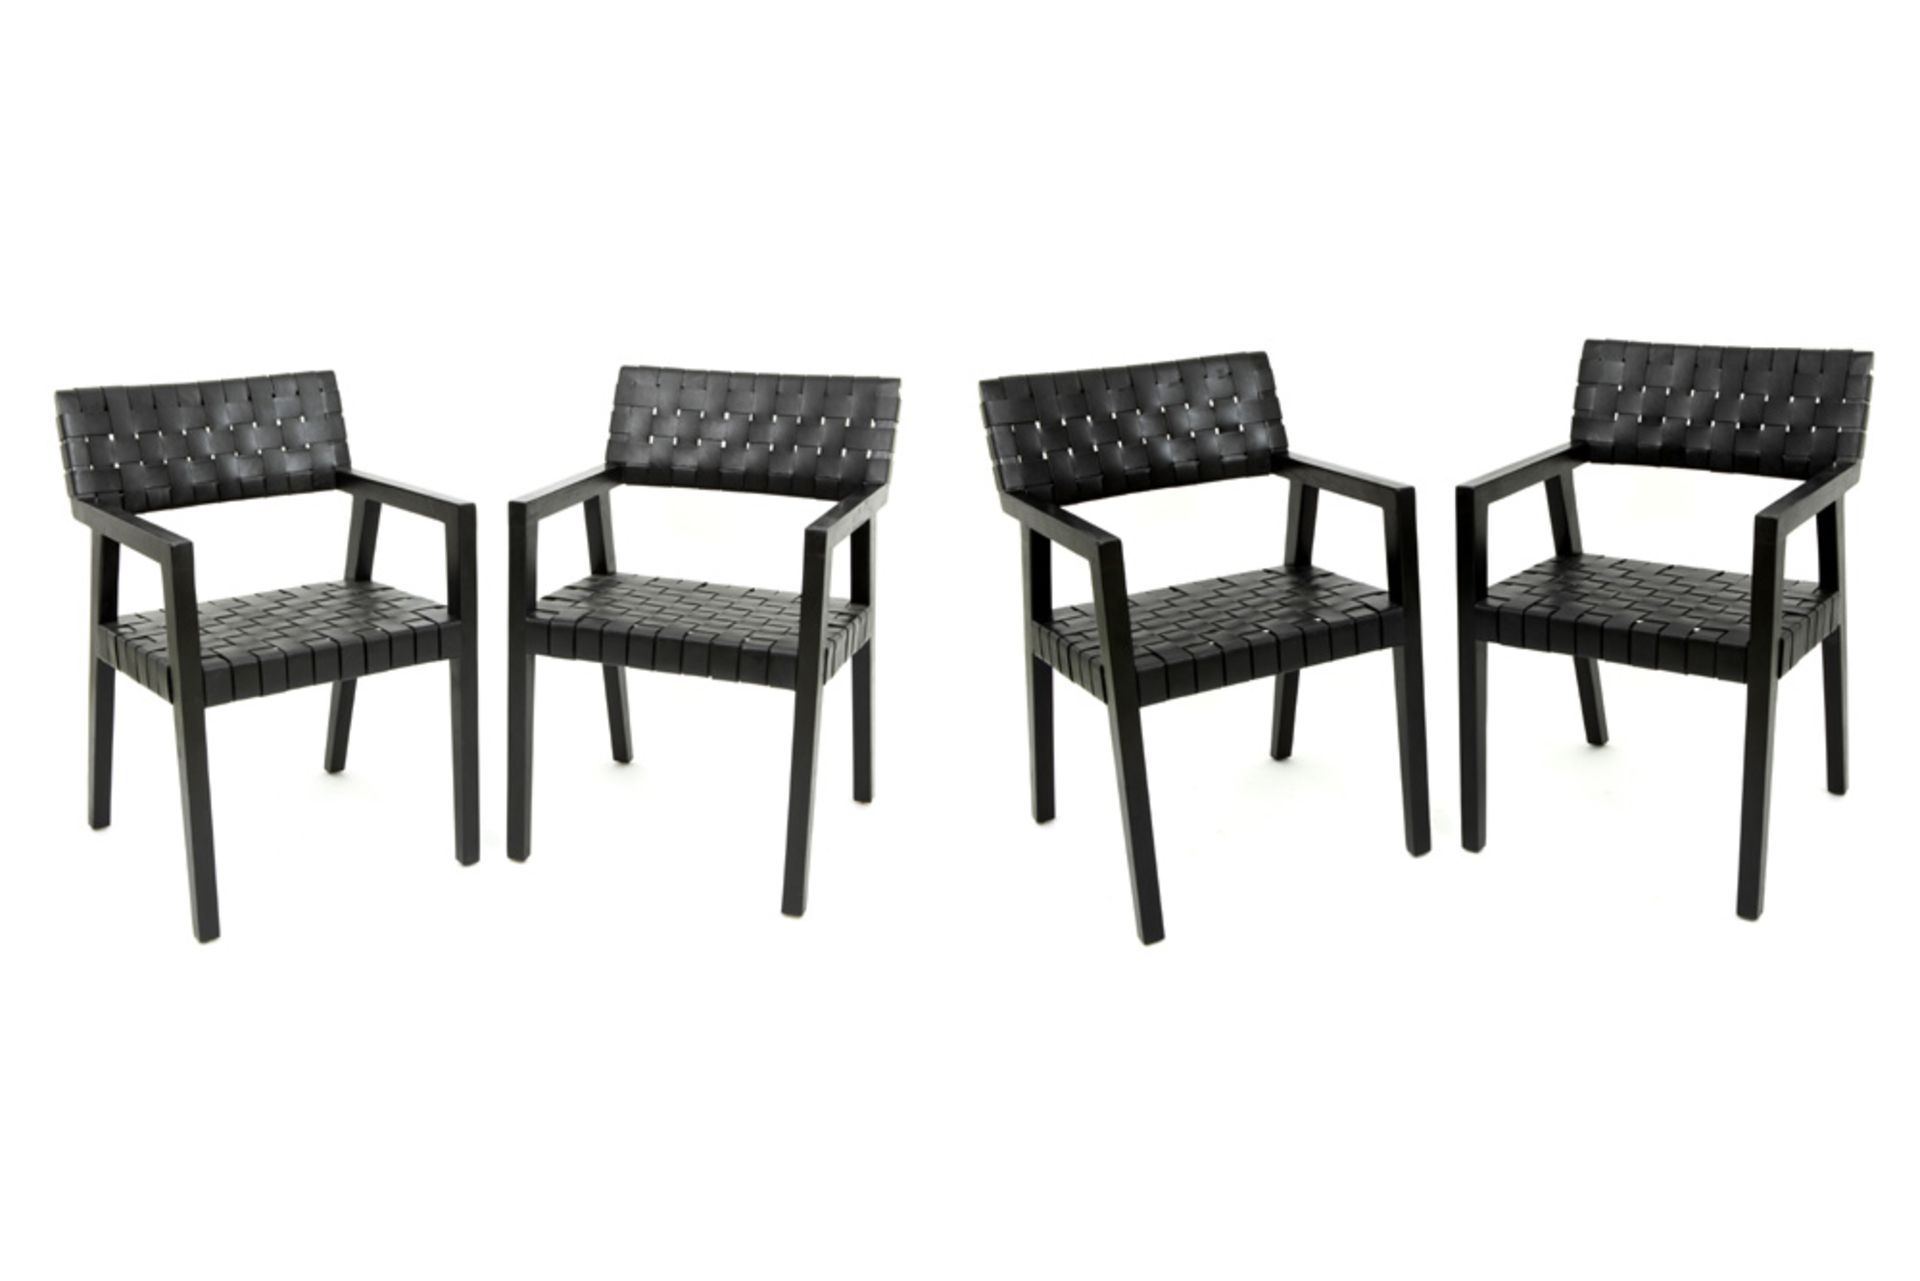 set of four Olivier De Schrijver signed "Boss" design armchairs made by Ode's Design in ebonised